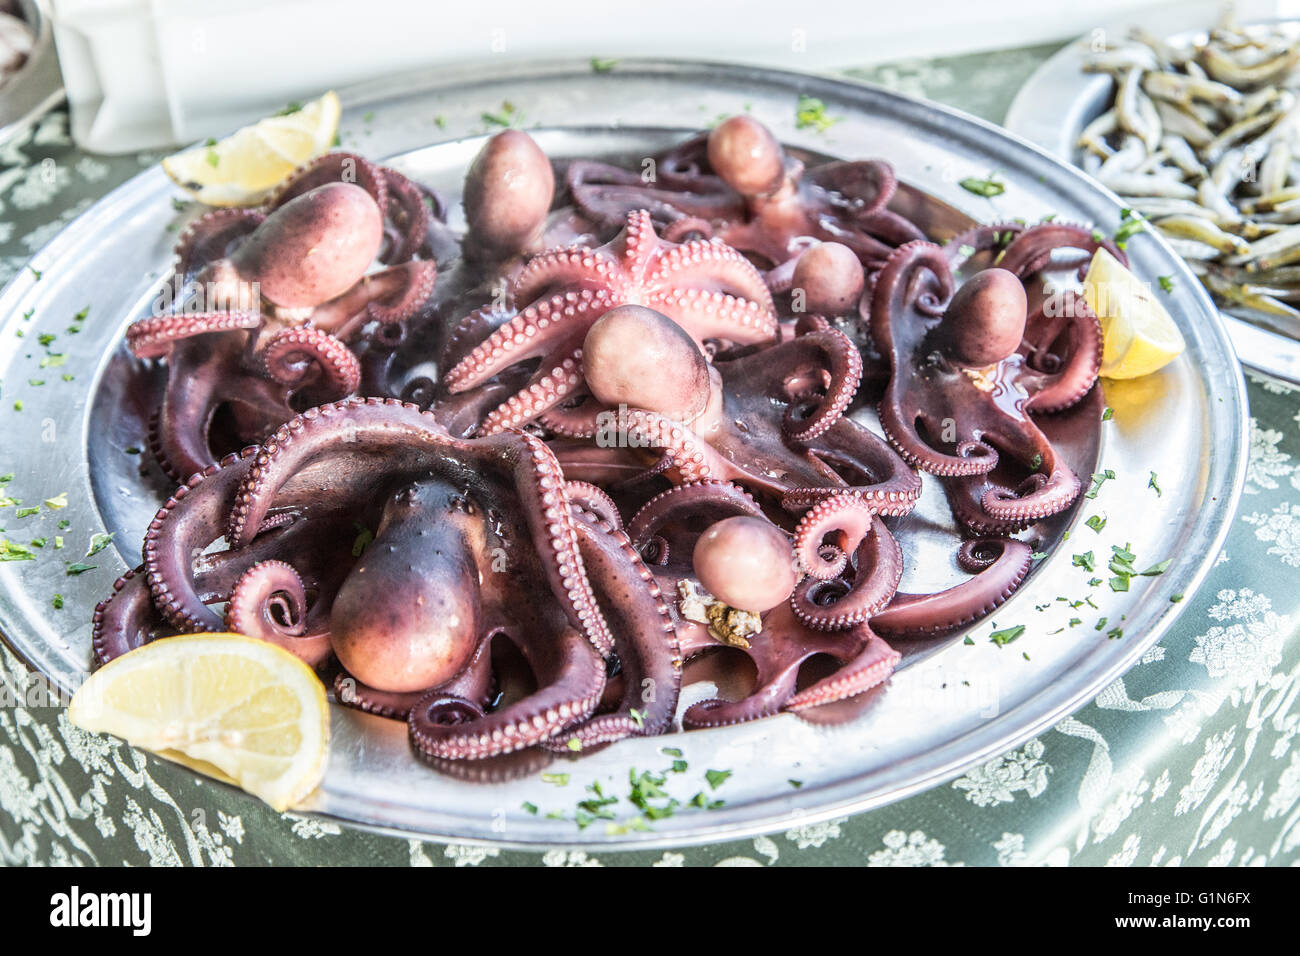 Grilled octopus. Traditional Mediterranean dish. Stock Photo